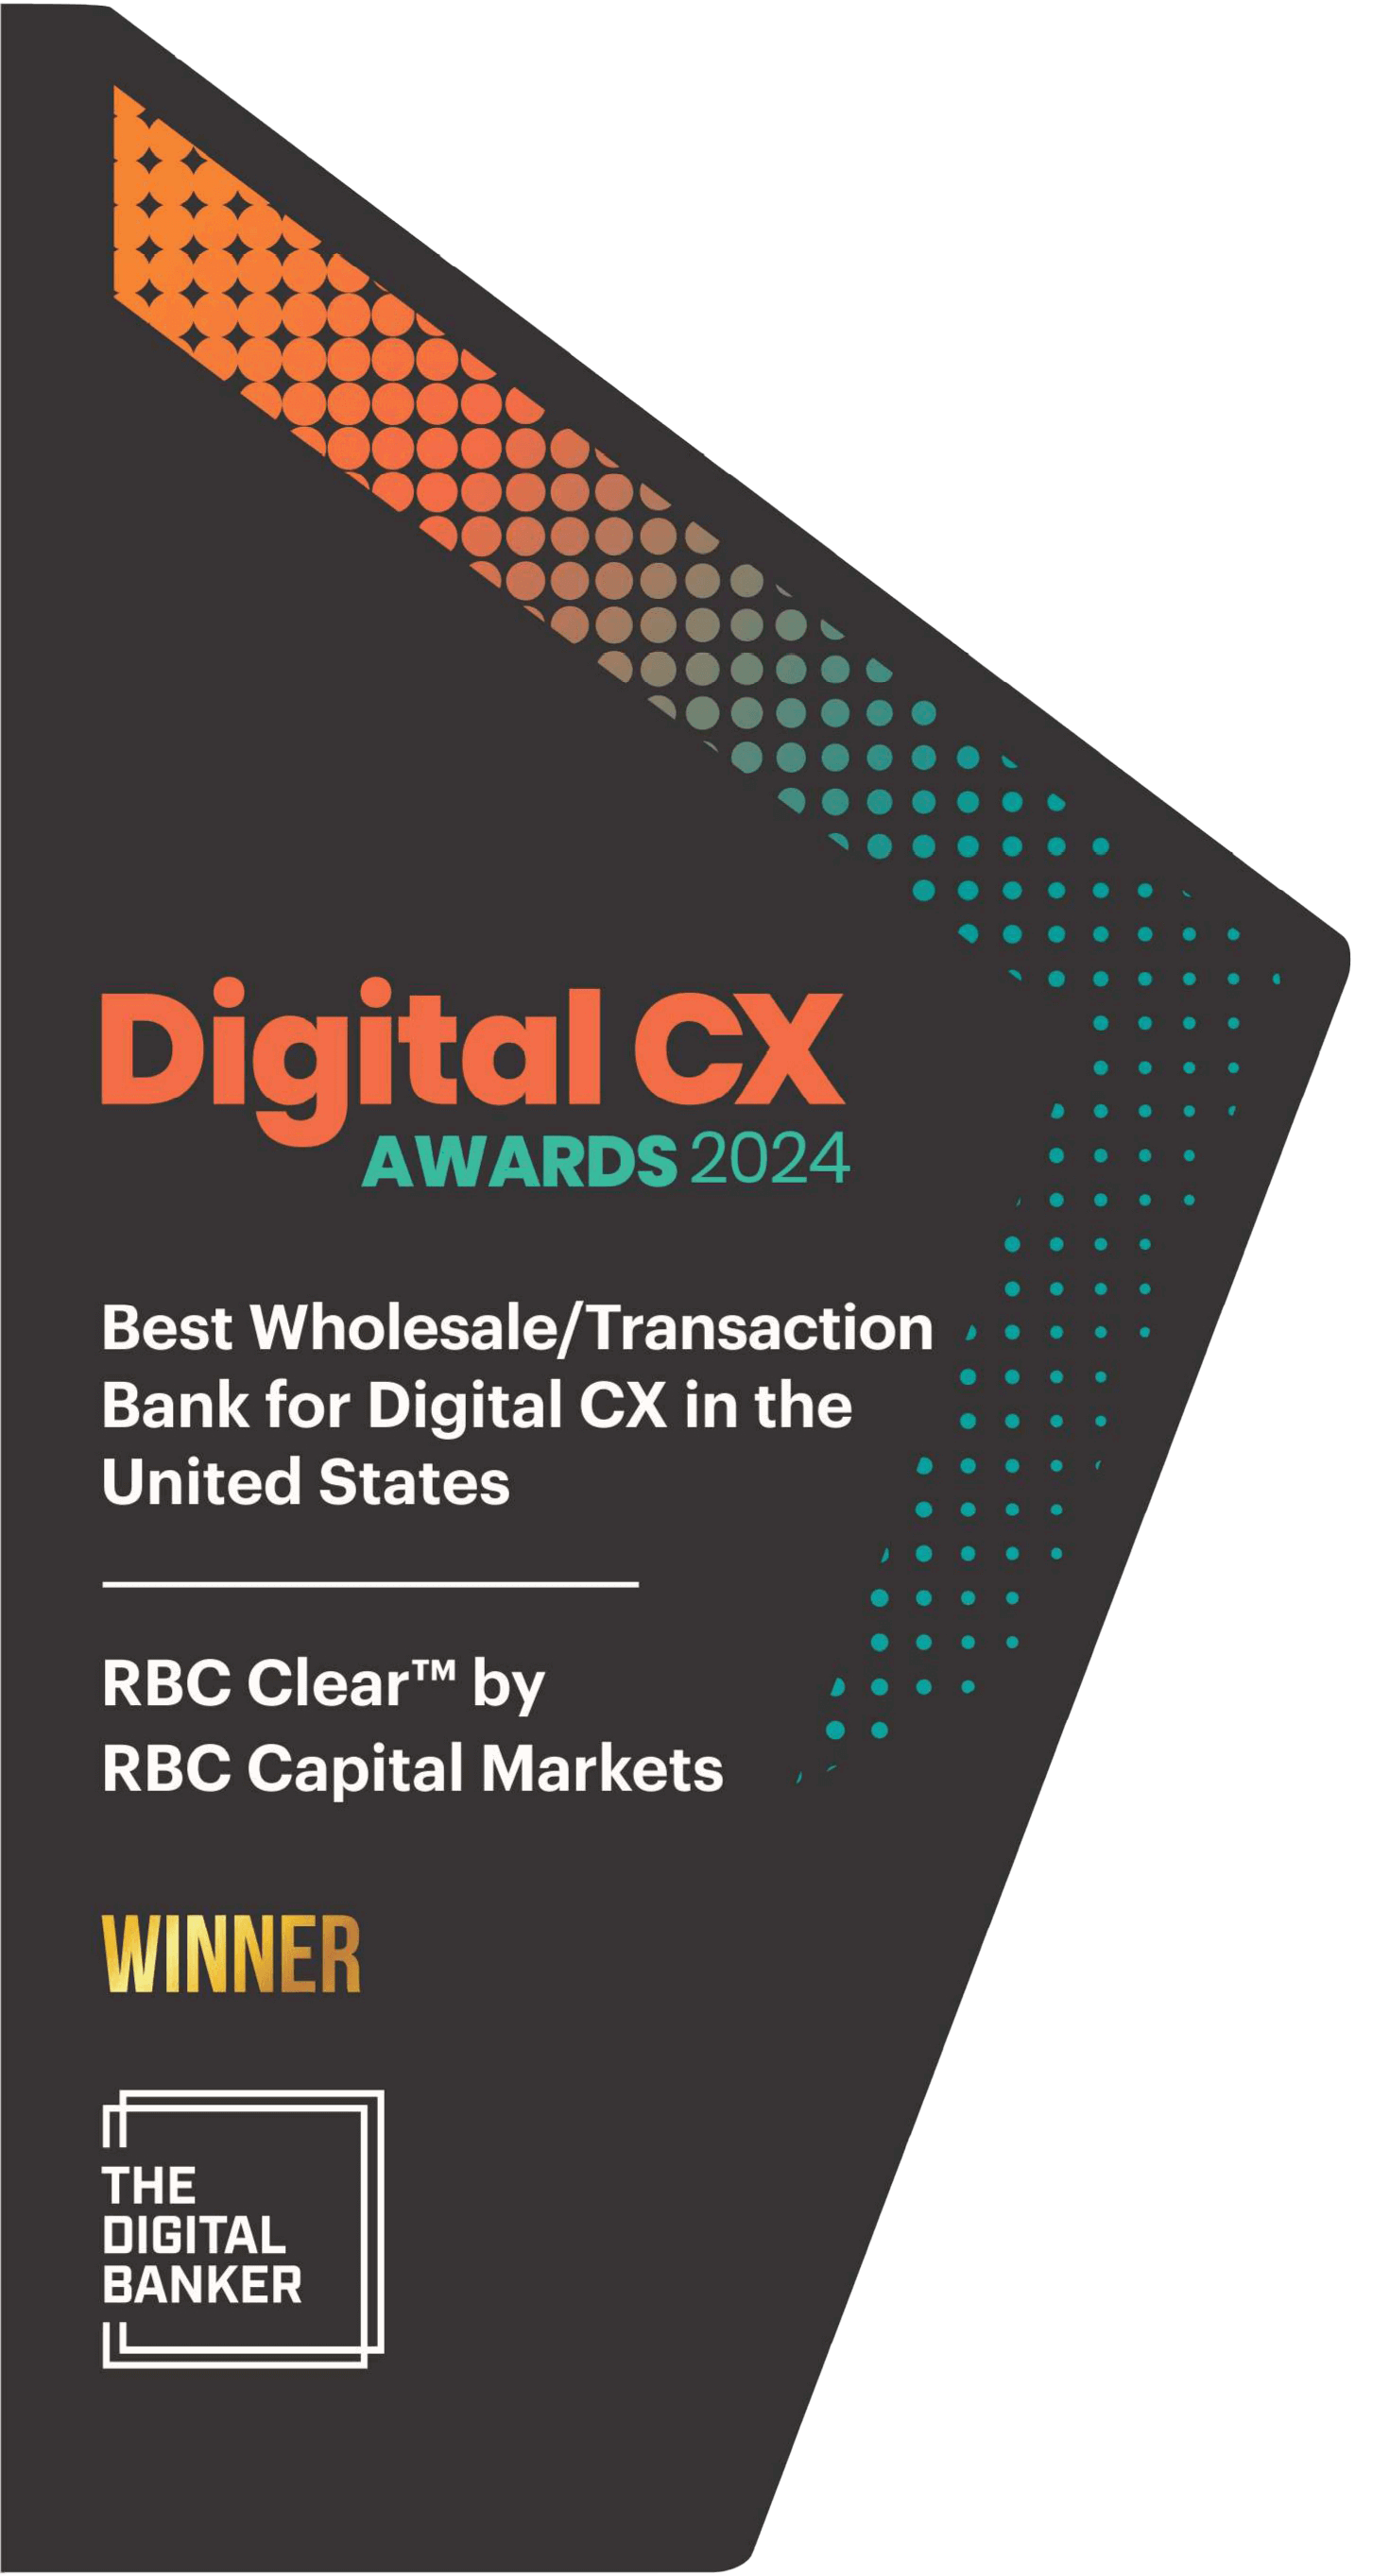 Best Wholesale Transaction Bank for Digital CX in the United States - RBC Clear by RBC Capital Markets